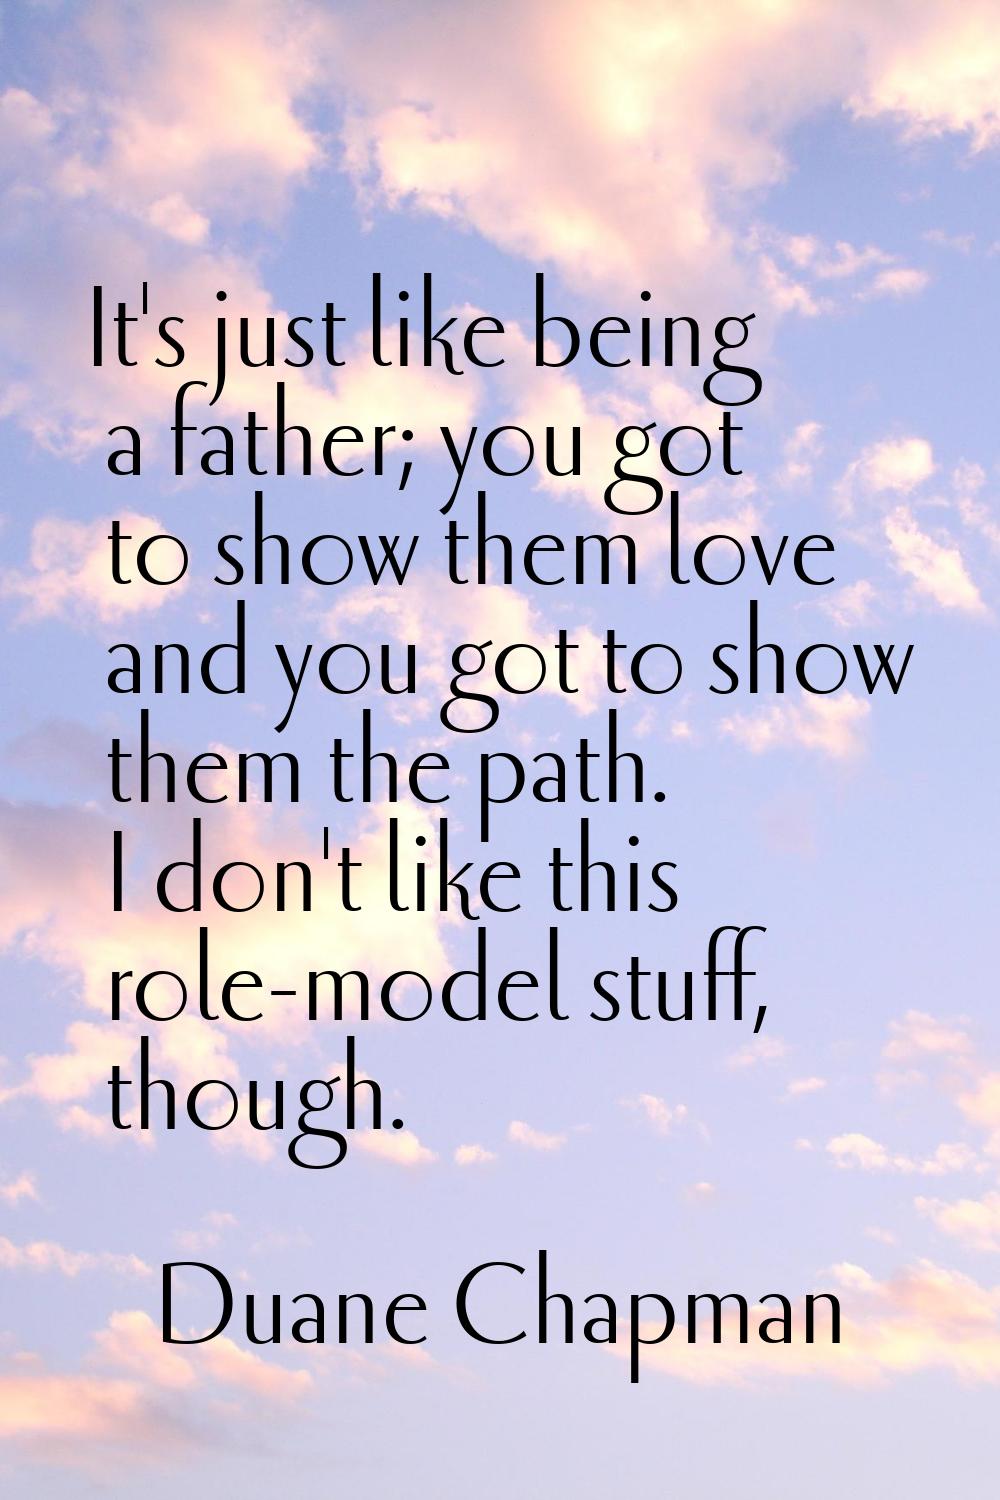 It's just like being a father; you got to show them love and you got to show them the path. I don't